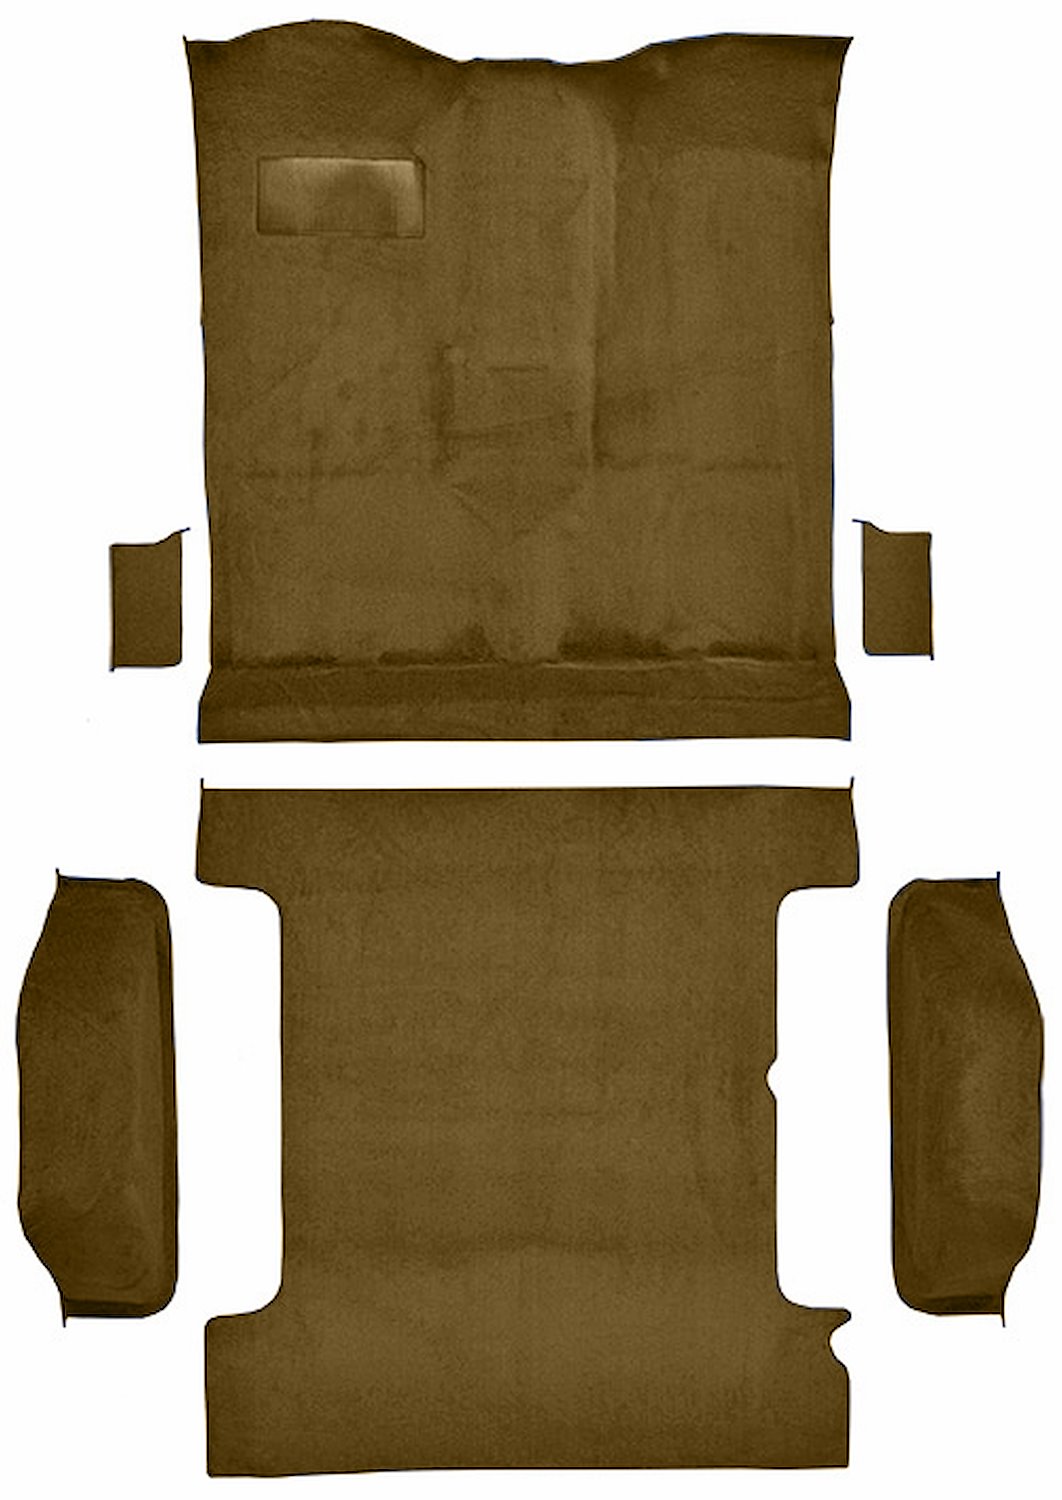 Molded Cut Pile Passenger and Cargo Area Carpet for 1978-1980 Chevy K5 Blazer, GMC Jimmy [OE- Jute Backing, 6-Piece, Caramel]